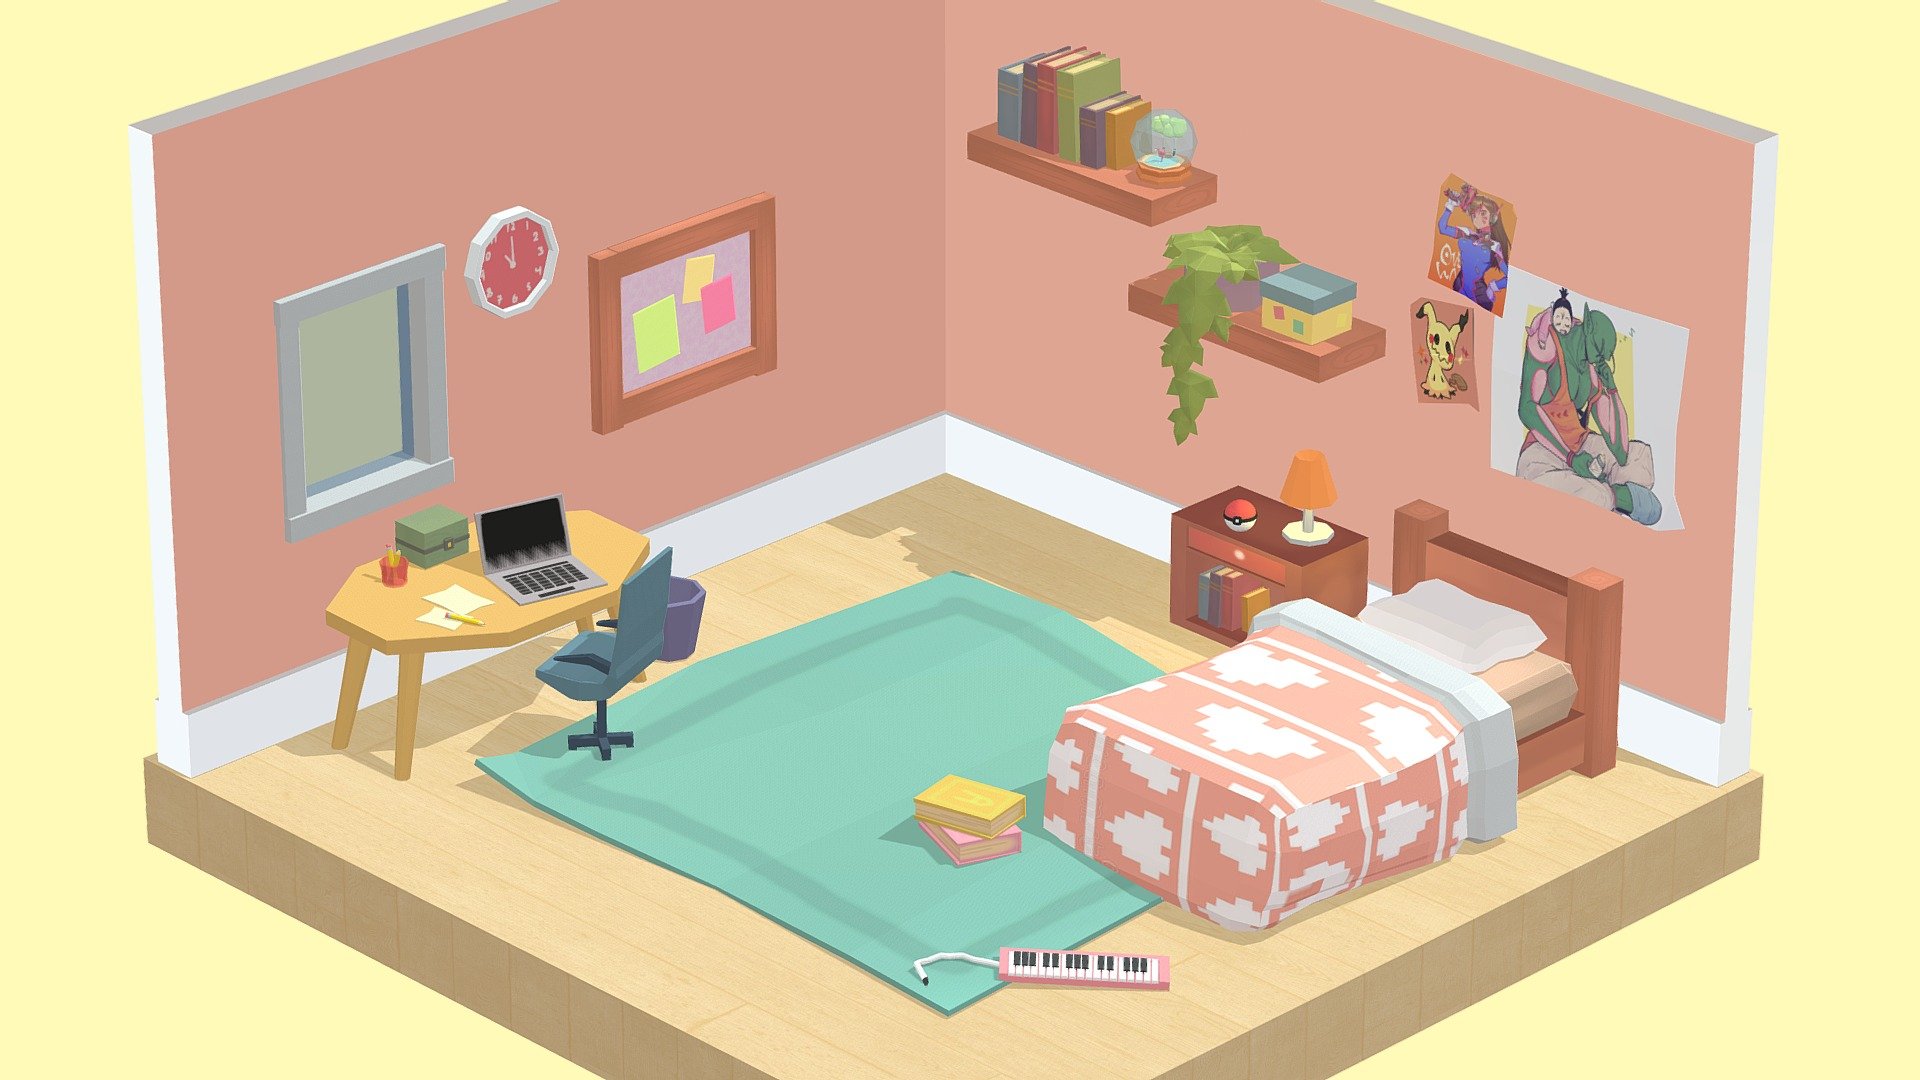 My humble participation on #IsometricRoomChallenge - Isometric Room - 3D model by Rayra Alencar (@rayravvieira) 3d model